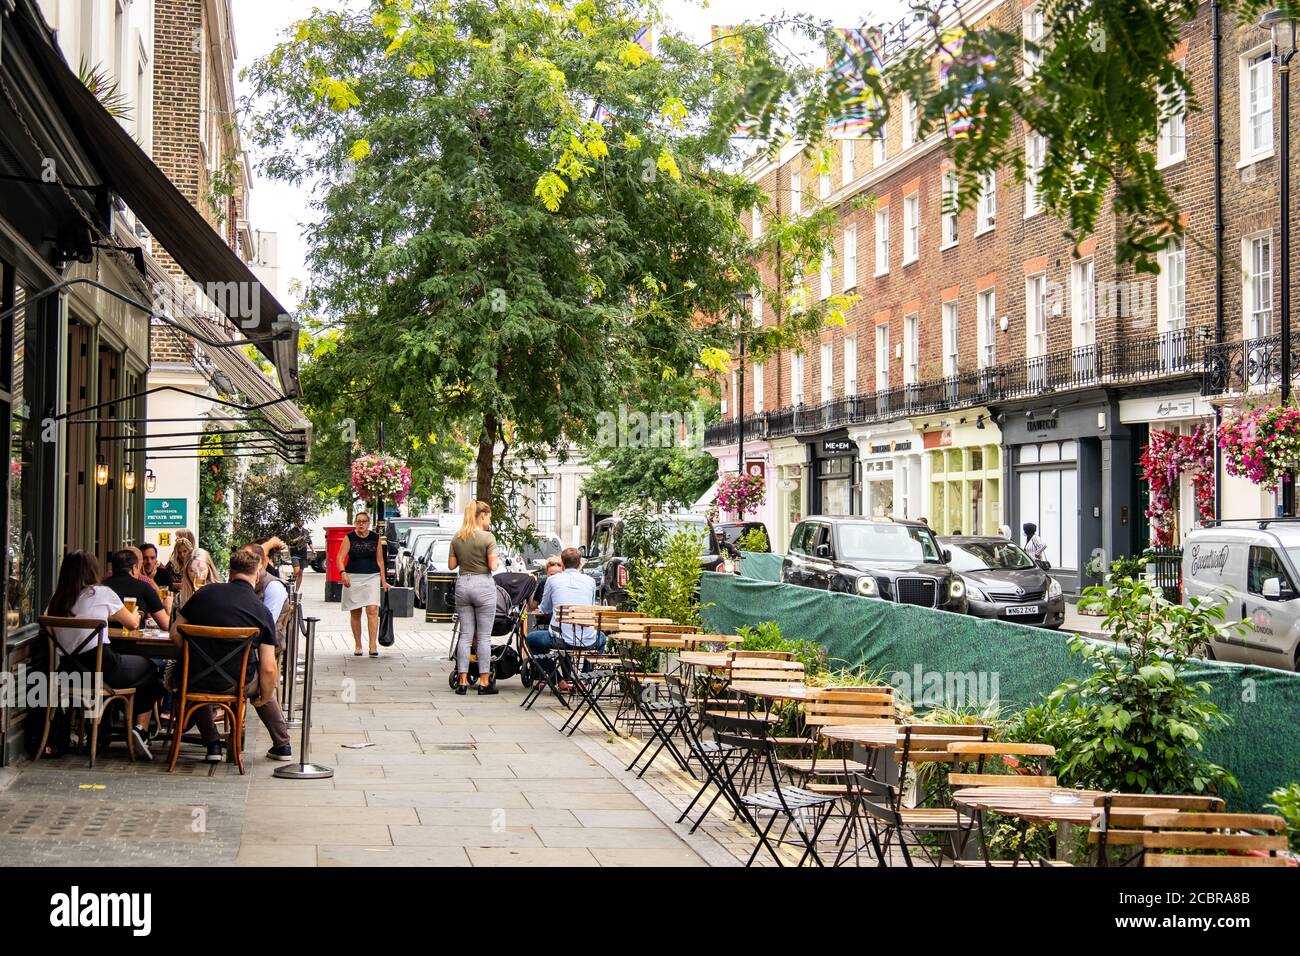 London- August, 2020:  Outdoor seating restaurant on Elizabeth Street in Belgravia, an upmarket street of shops and eateries close to Victoria Station Stock Photo